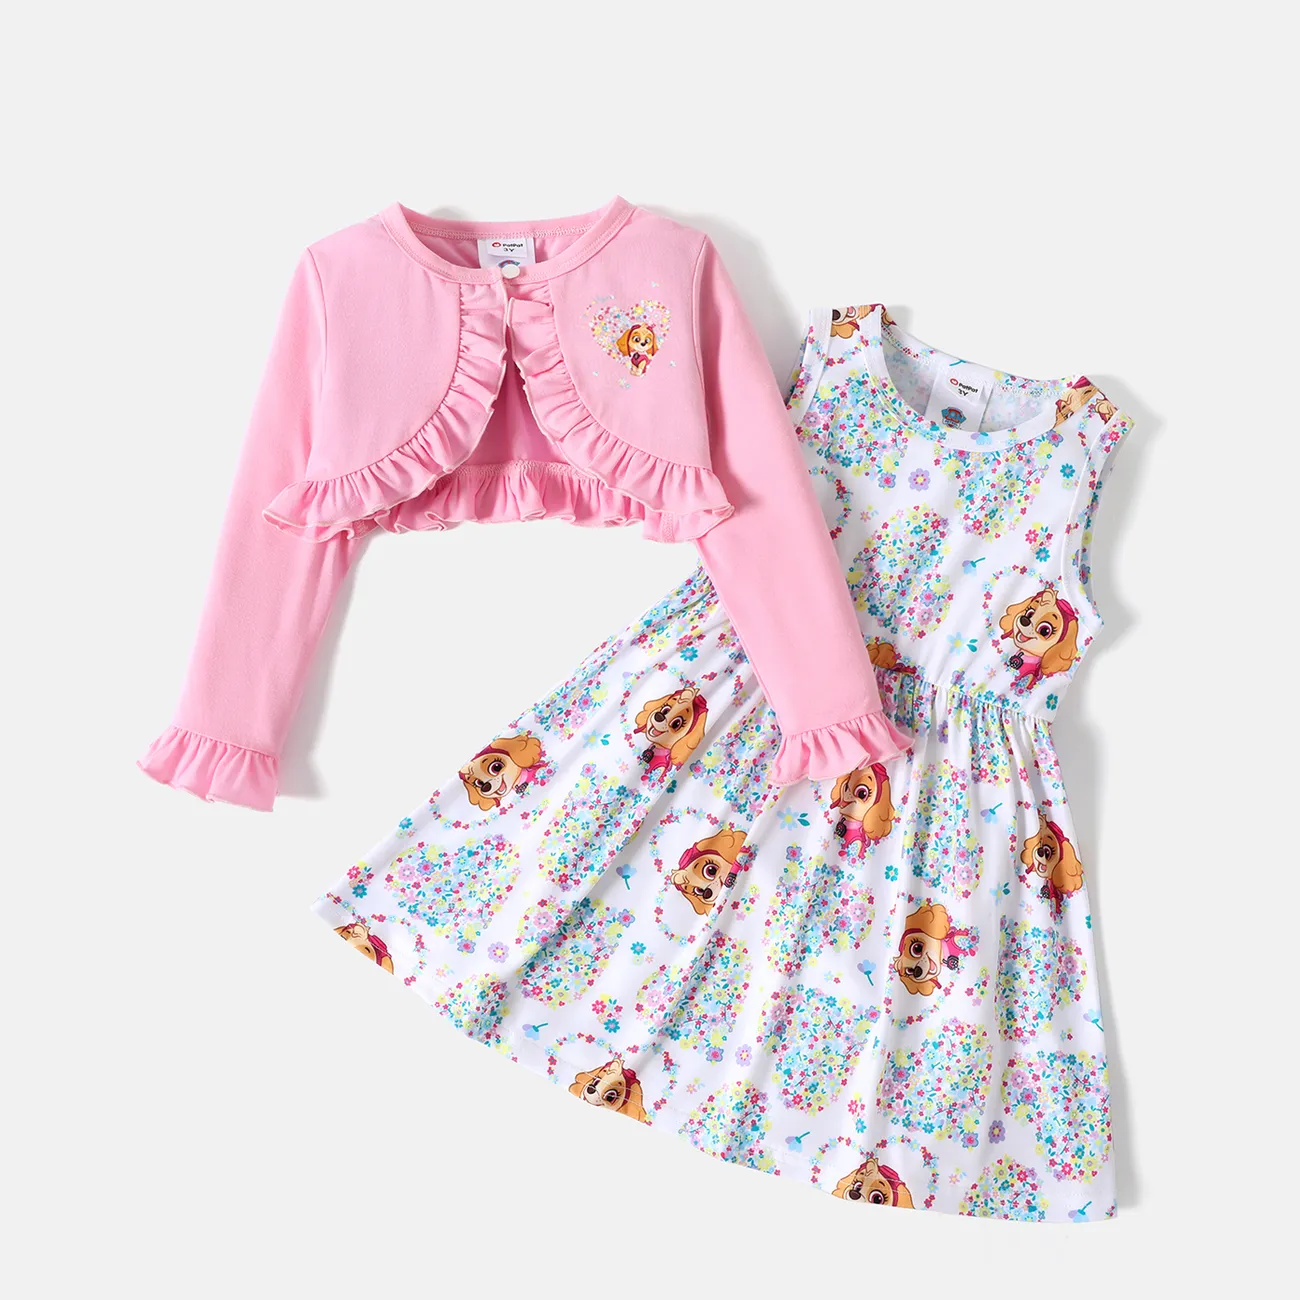 PAW Patrol 2-piece Toddler Girl Skye Ruffle Top and Allover Tank Dress Set Multi-color big image 1